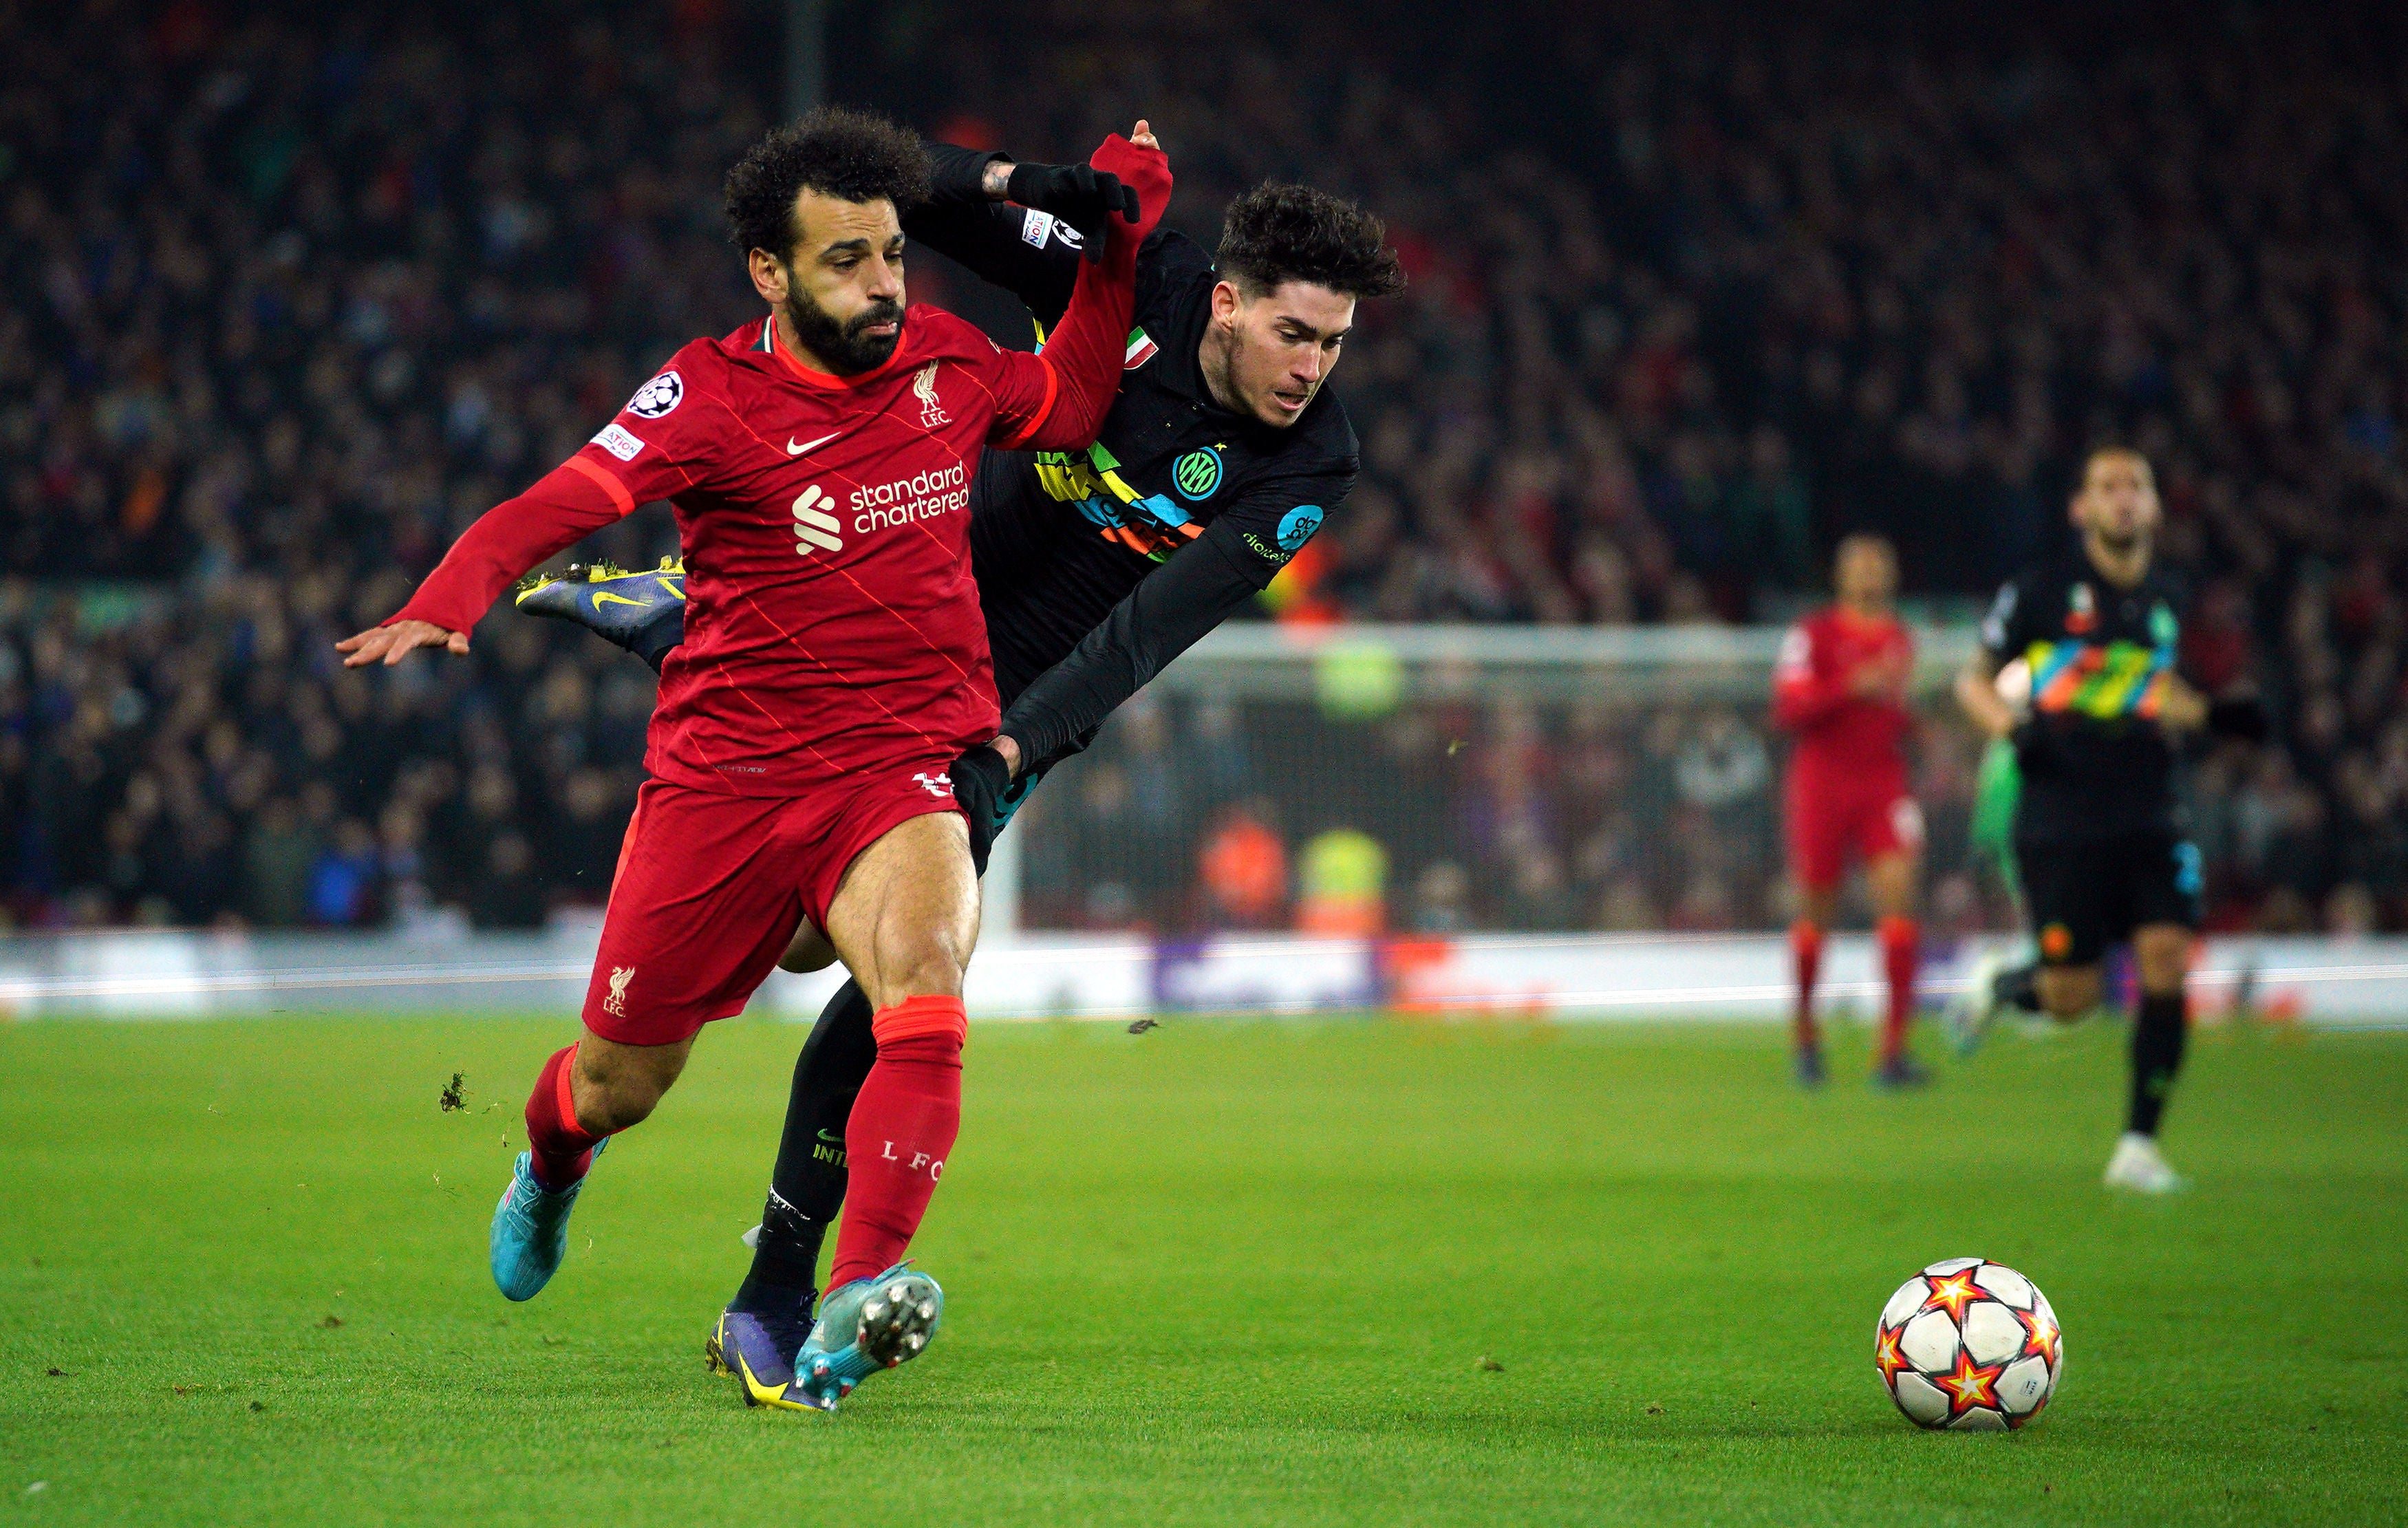 Liverpool host Inter with a place in the Champions League quarter-finals at stake